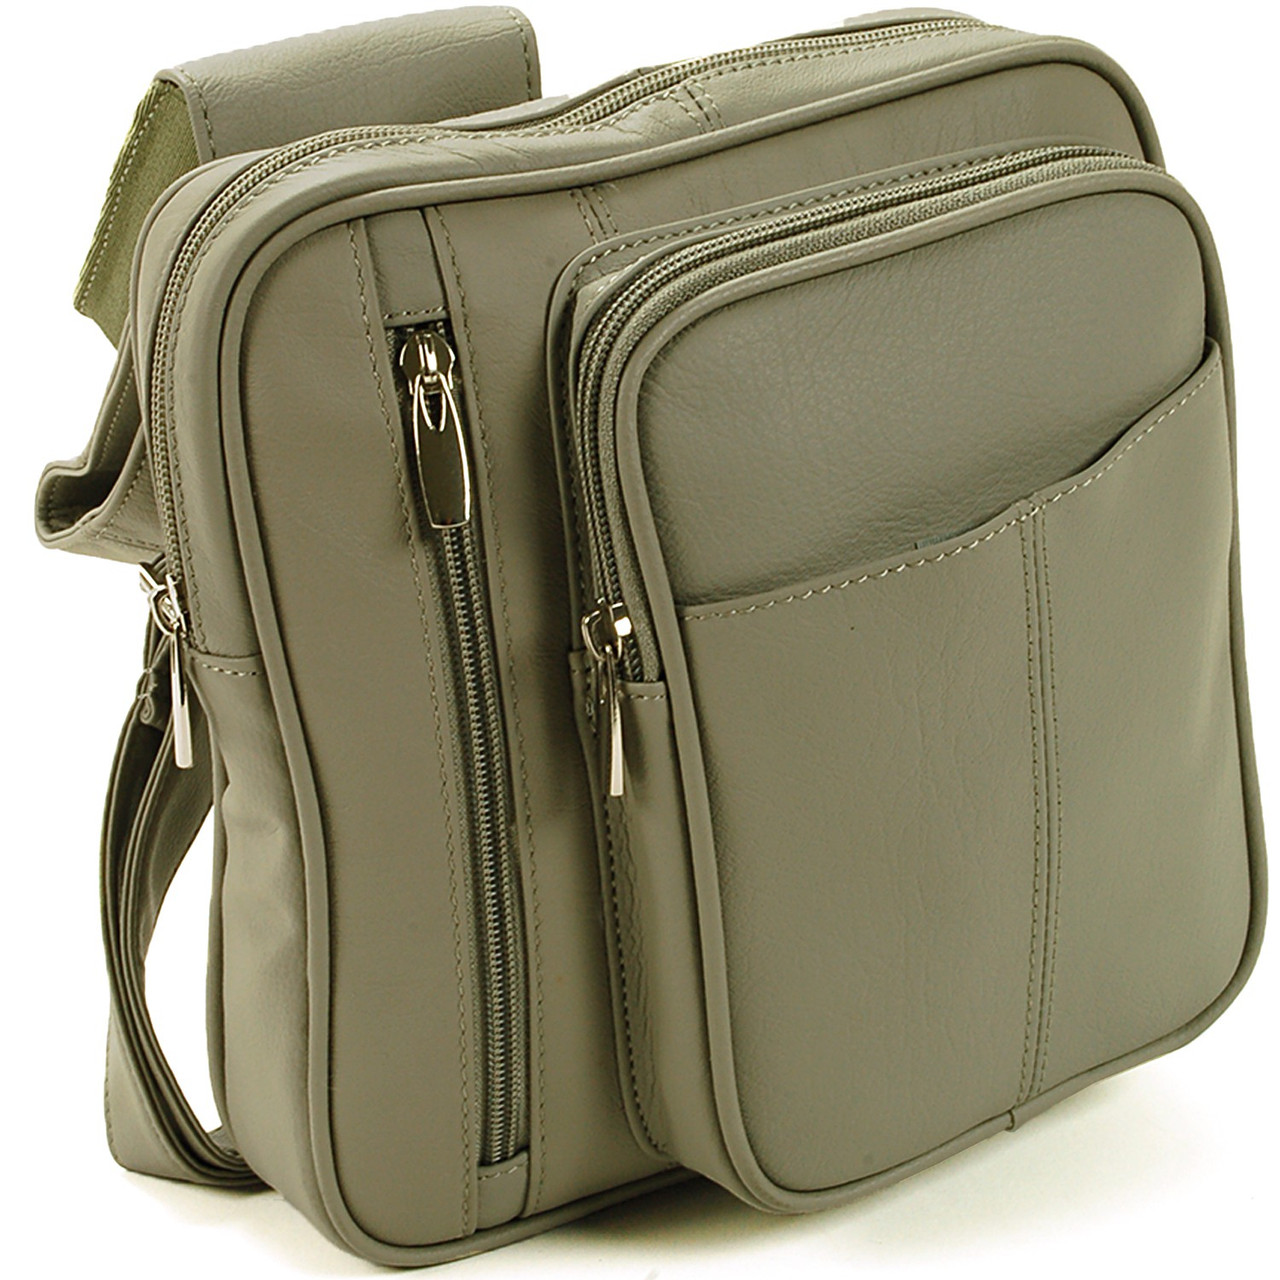 Concealed Carry Purse | Evelyn Leather Crossbody Organizer Bag by Lady  Conceal – www.itsinthebagboutique.com